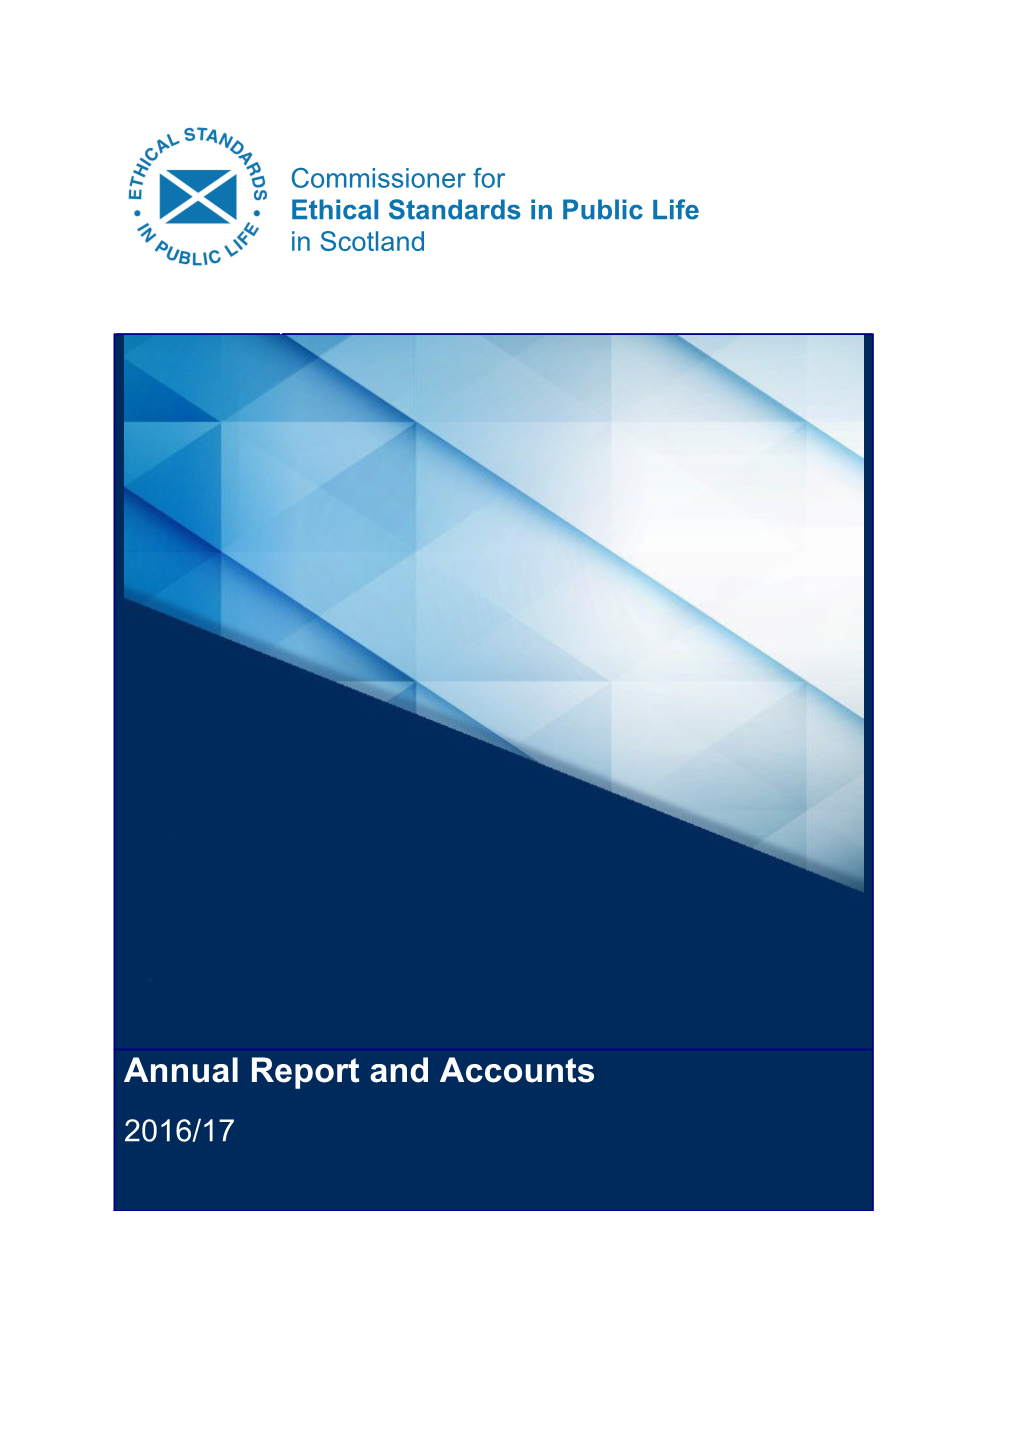 This Report Is Available in Alternative Formats on Request by Telephoning 0300 011 0550